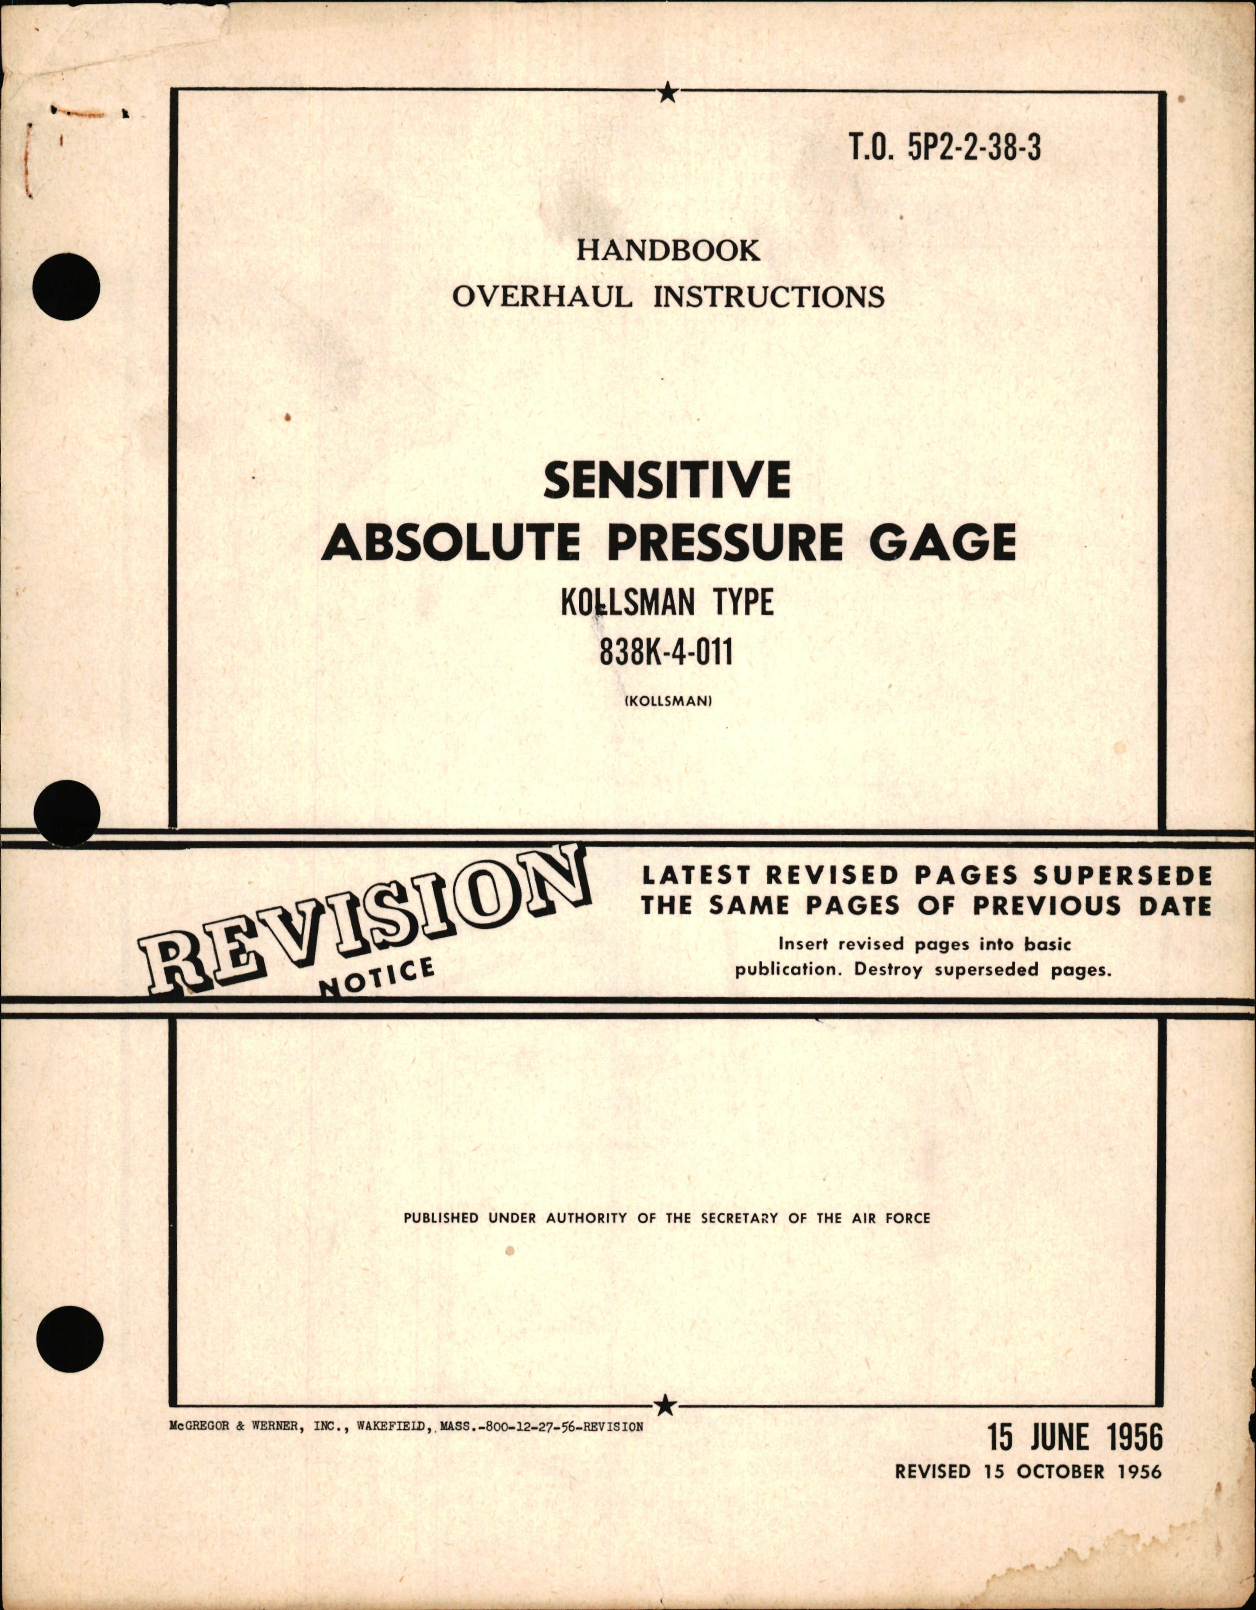 Sample page 1 from AirCorps Library document: Overhaul Instructions for Sensitive Absolute Pressure Gage, Type 838K-4-011